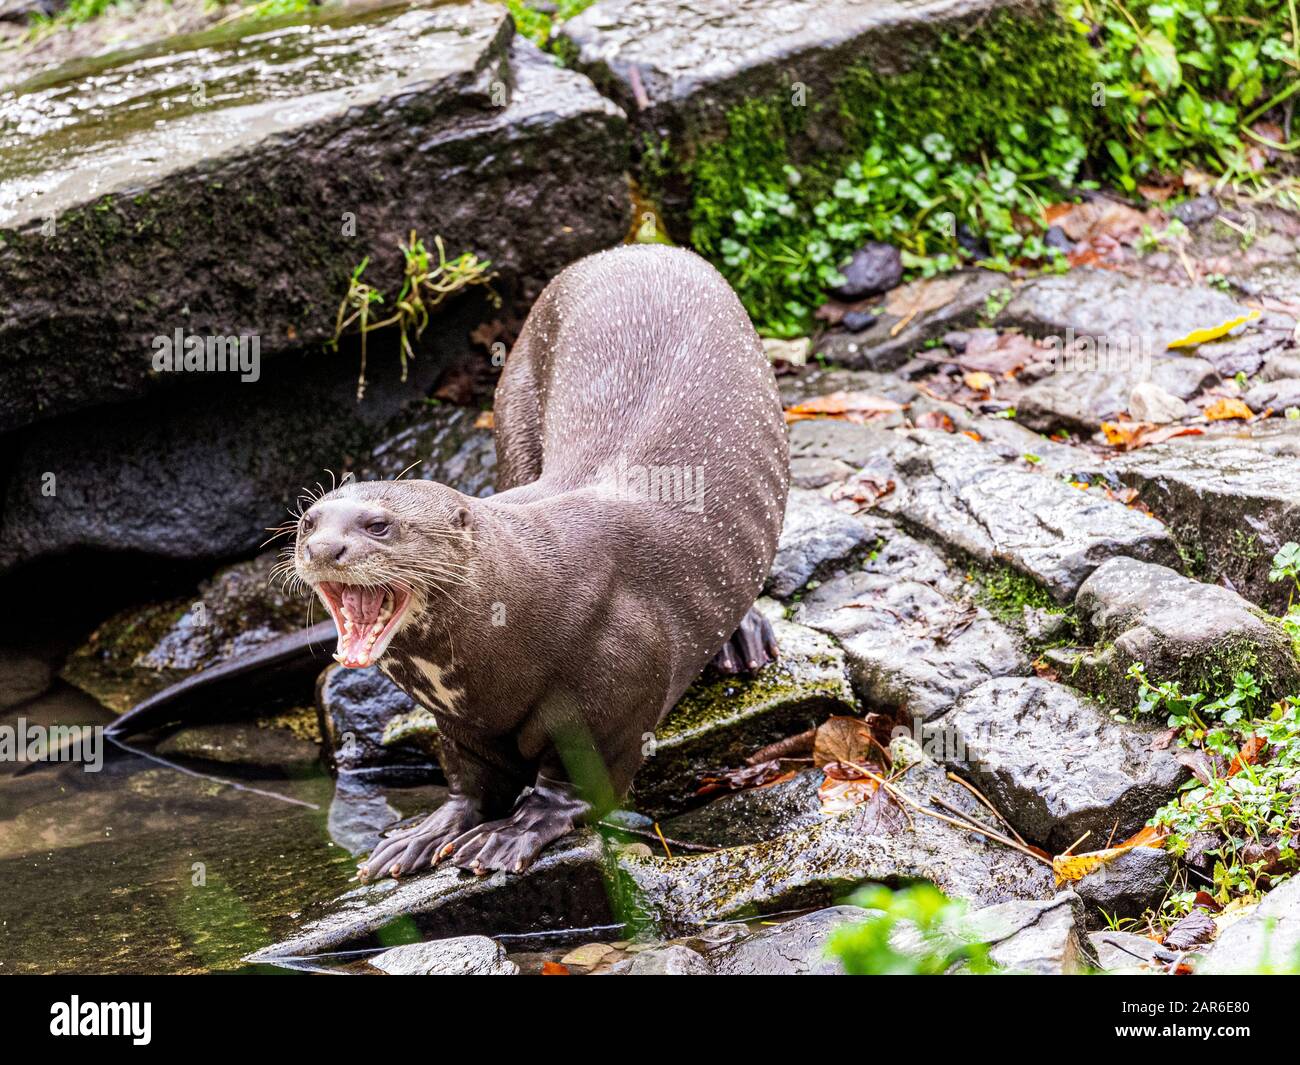 The North American River Otter (Lontra canadensis) Stock Photo